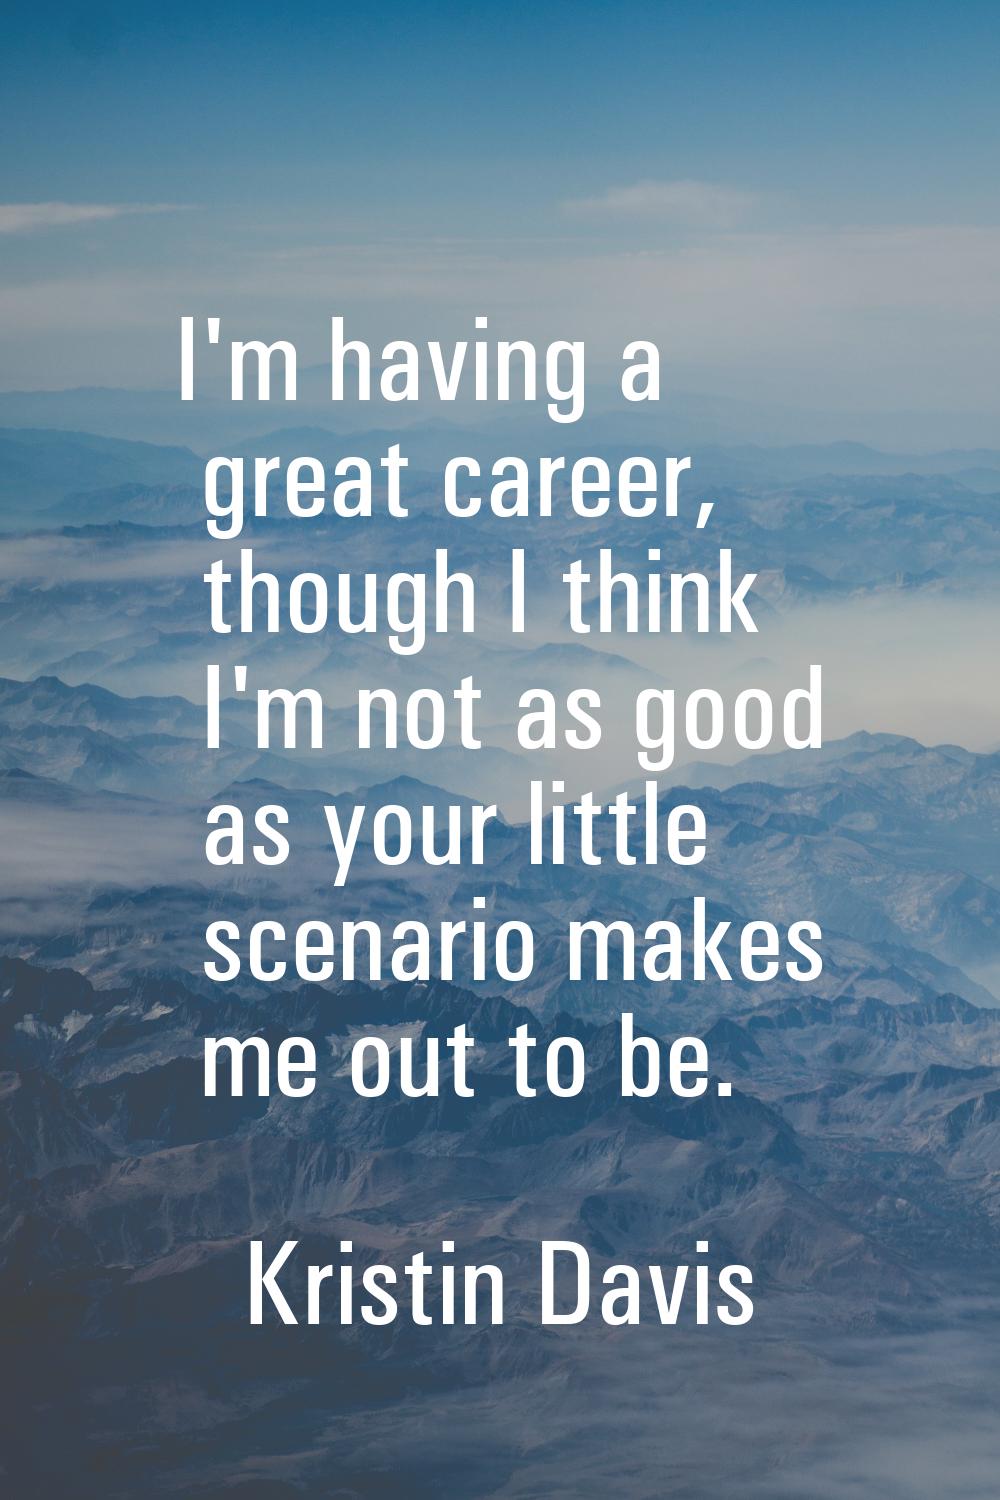 I'm having a great career, though I think I'm not as good as your little scenario makes me out to b